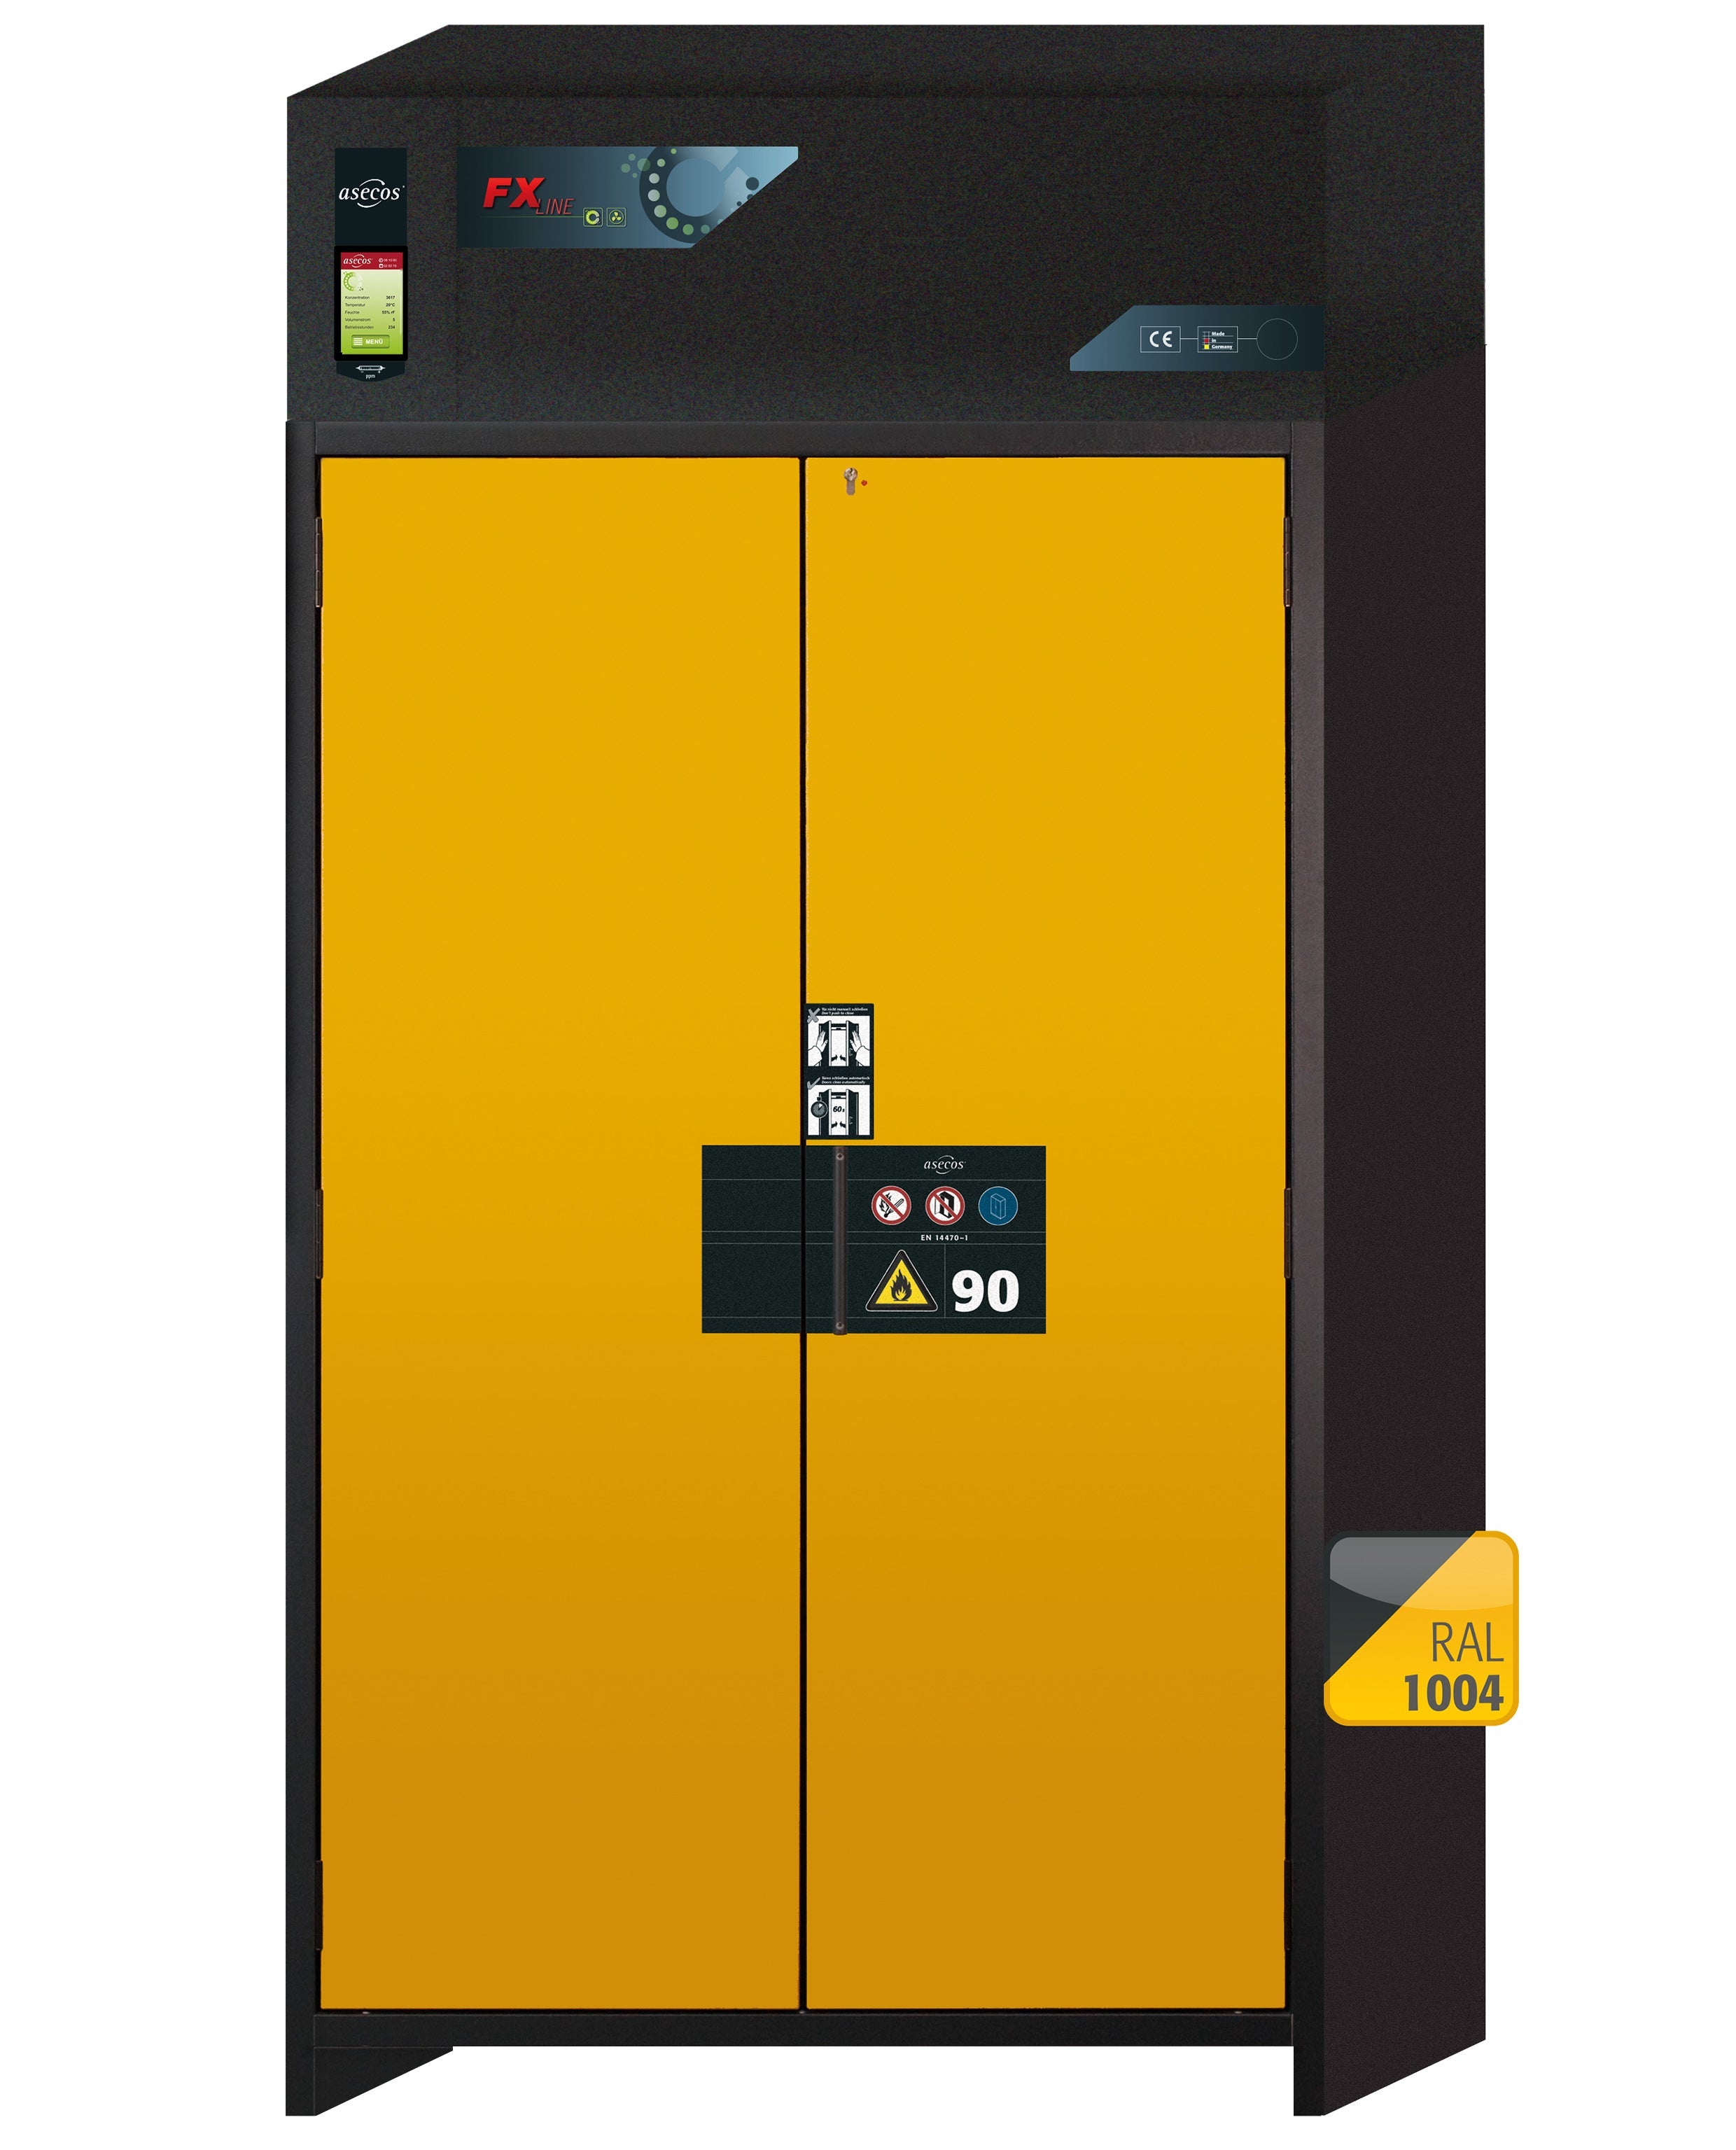 Type 90 recirculating air filter cabinet FX-PEGASUS-90 model FX90.229.120.WDAC in safety yellow RAL 1004 with 2x standard shelves (stainless steel 1.4301)